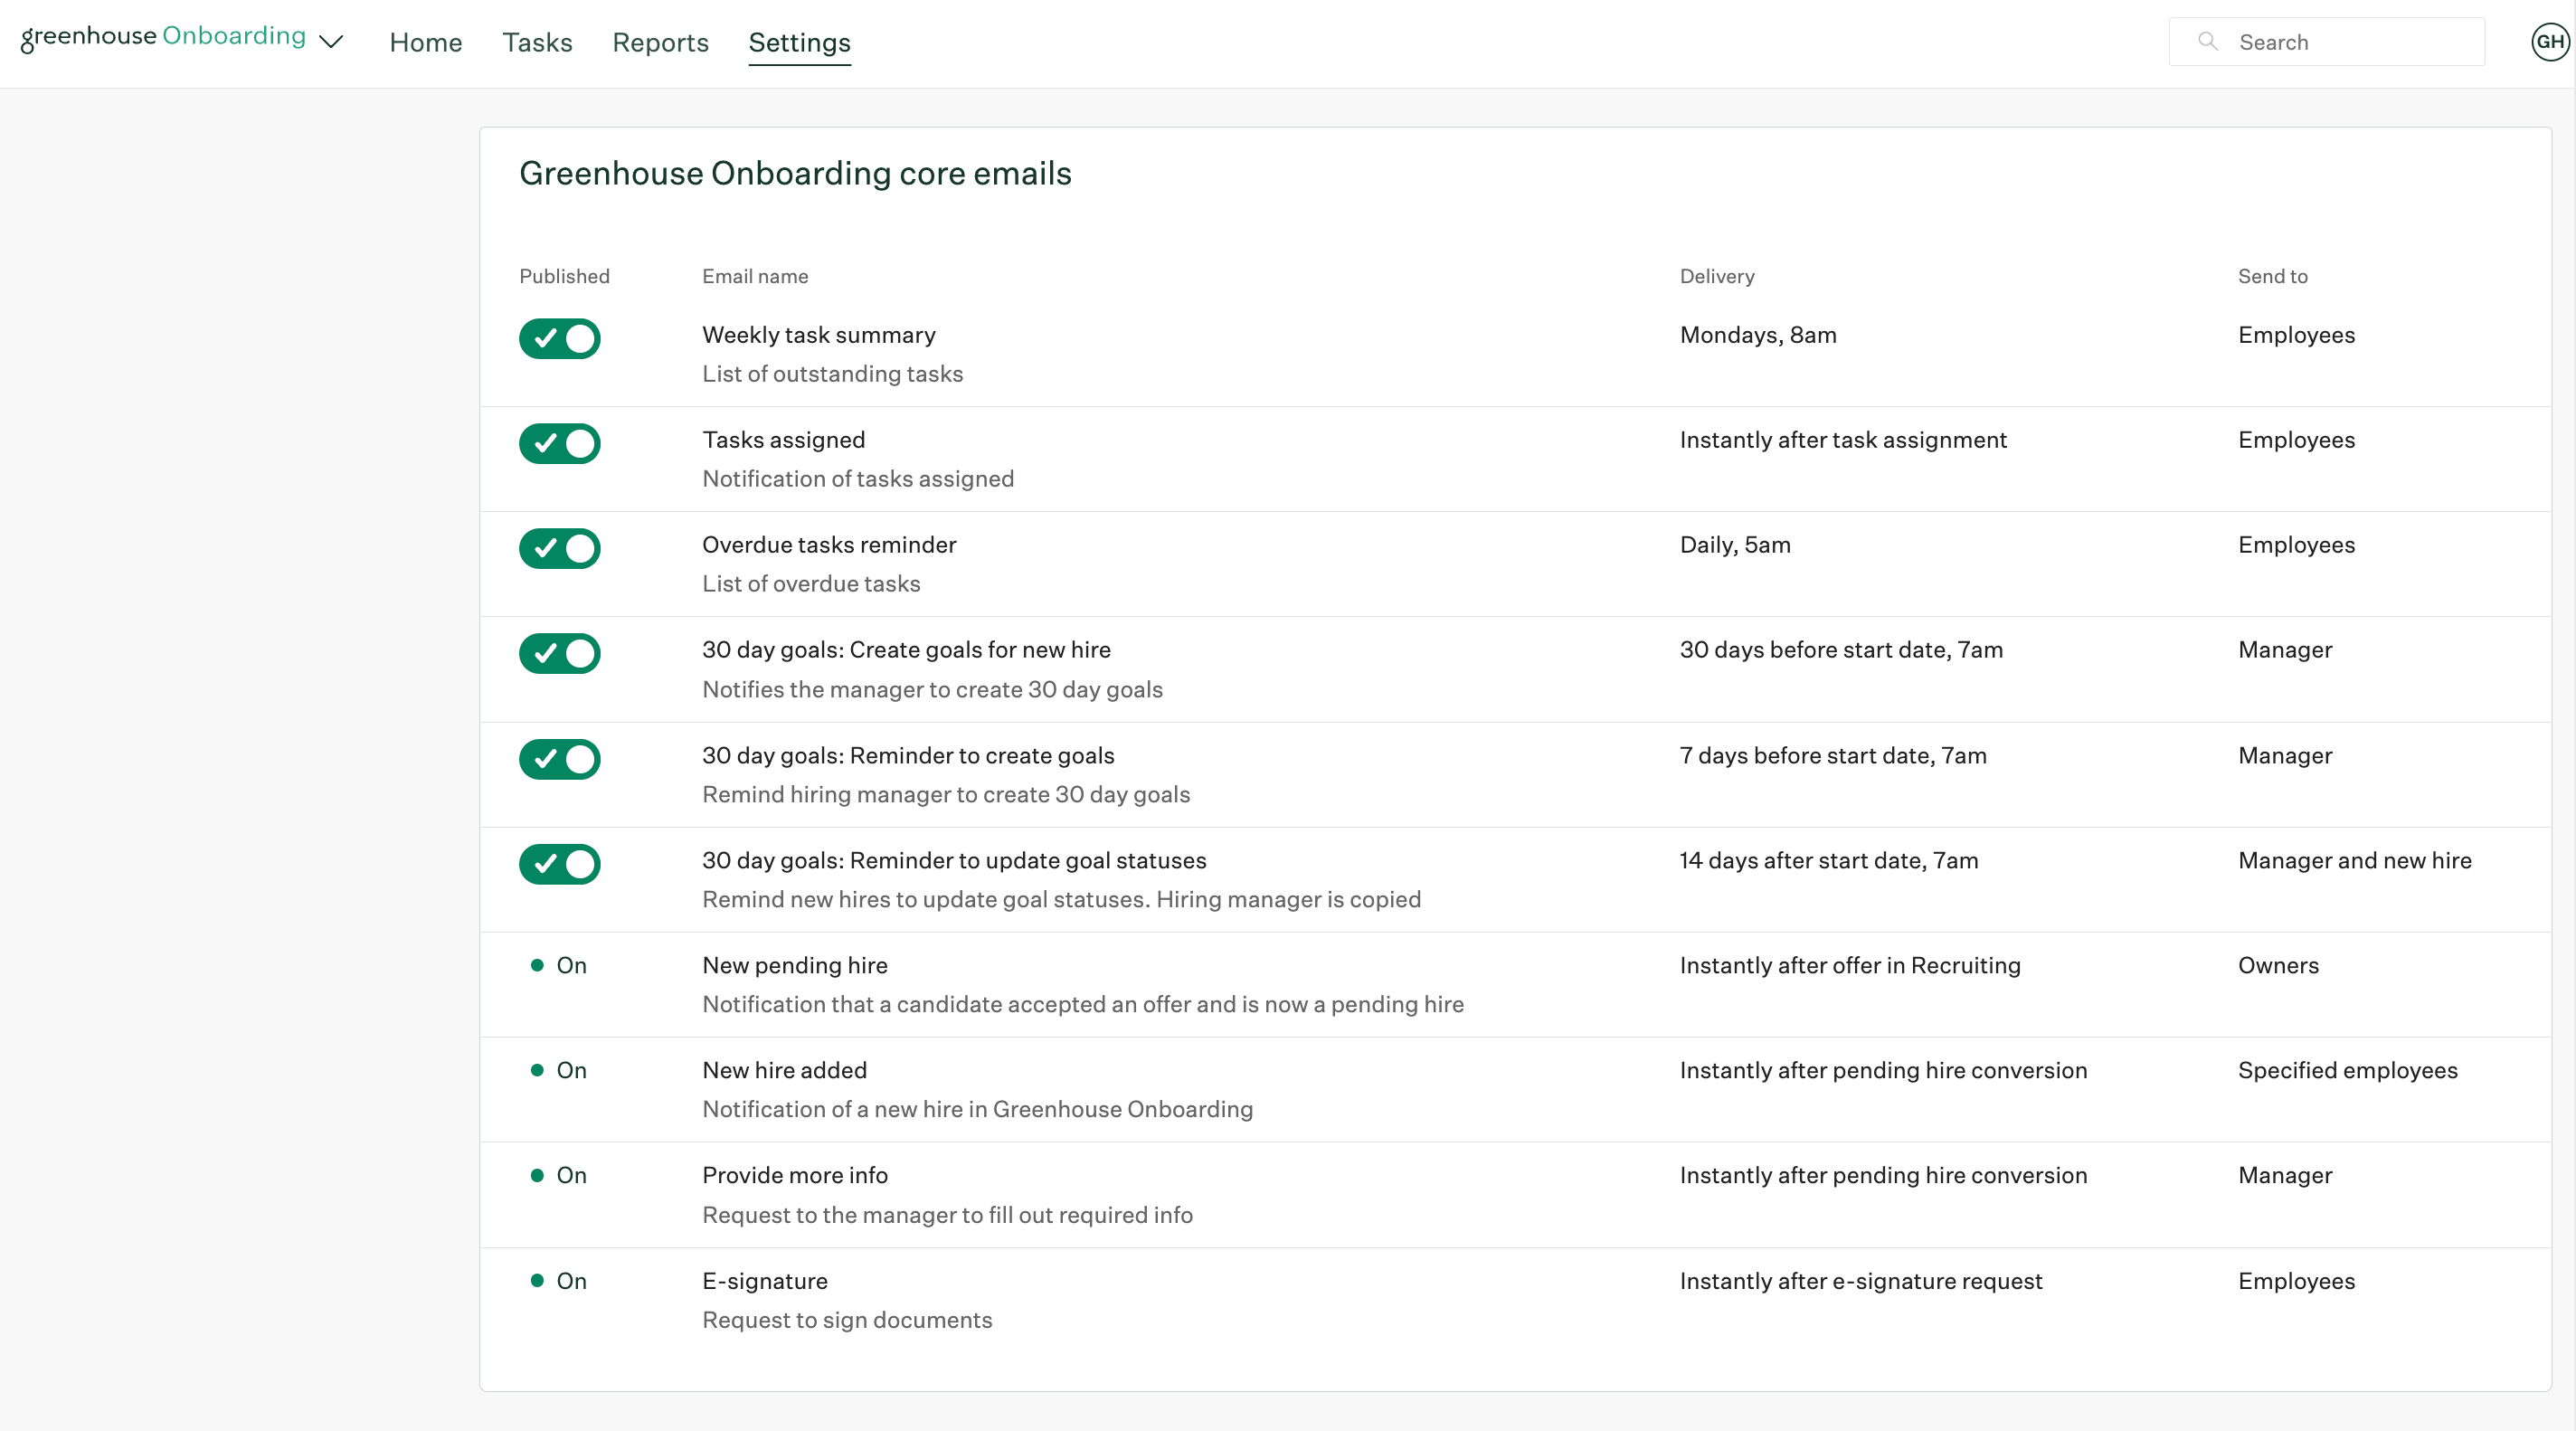 Screenshot-of-Greenhouse-Onboarding-core-emails-section-on-email-settings-page.png